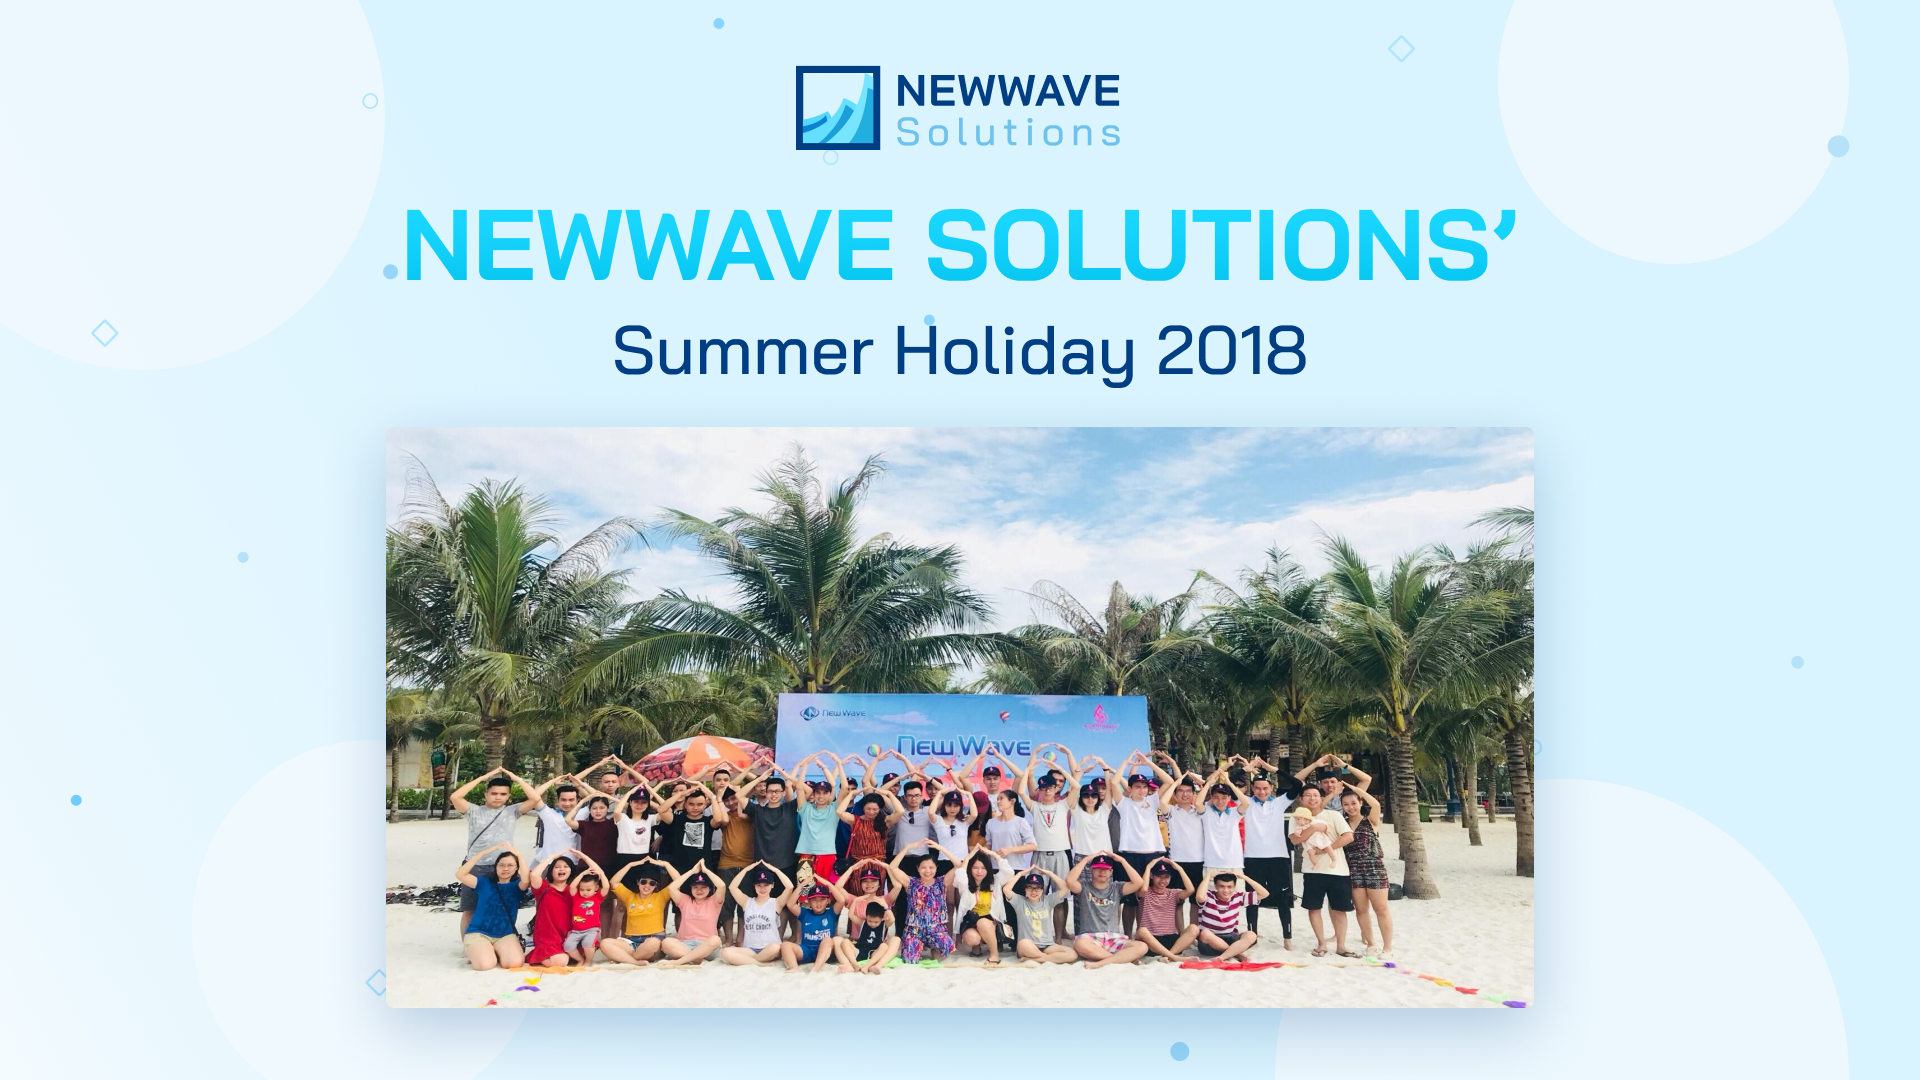 Newwave Solutions' Summer Holiday 2018